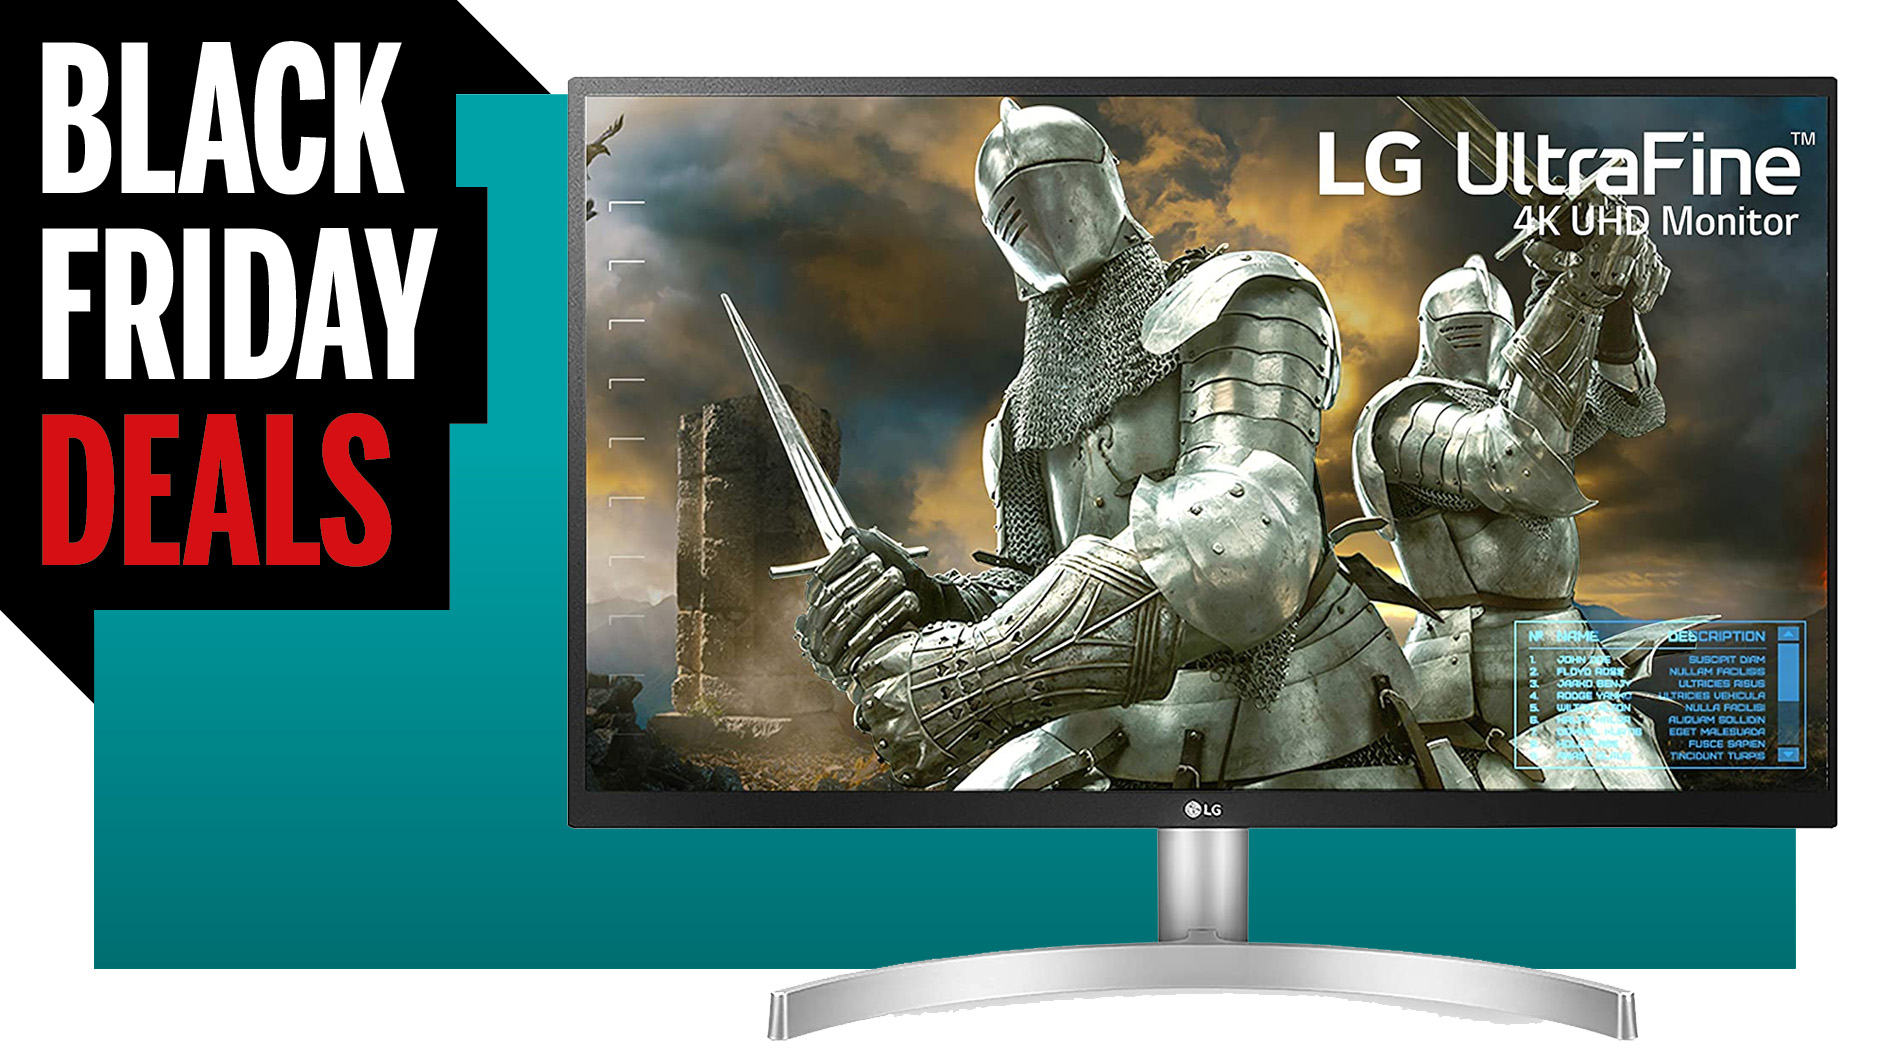  LG's 27-inch monitor delivers sweet 4K IPS goodness for $299 